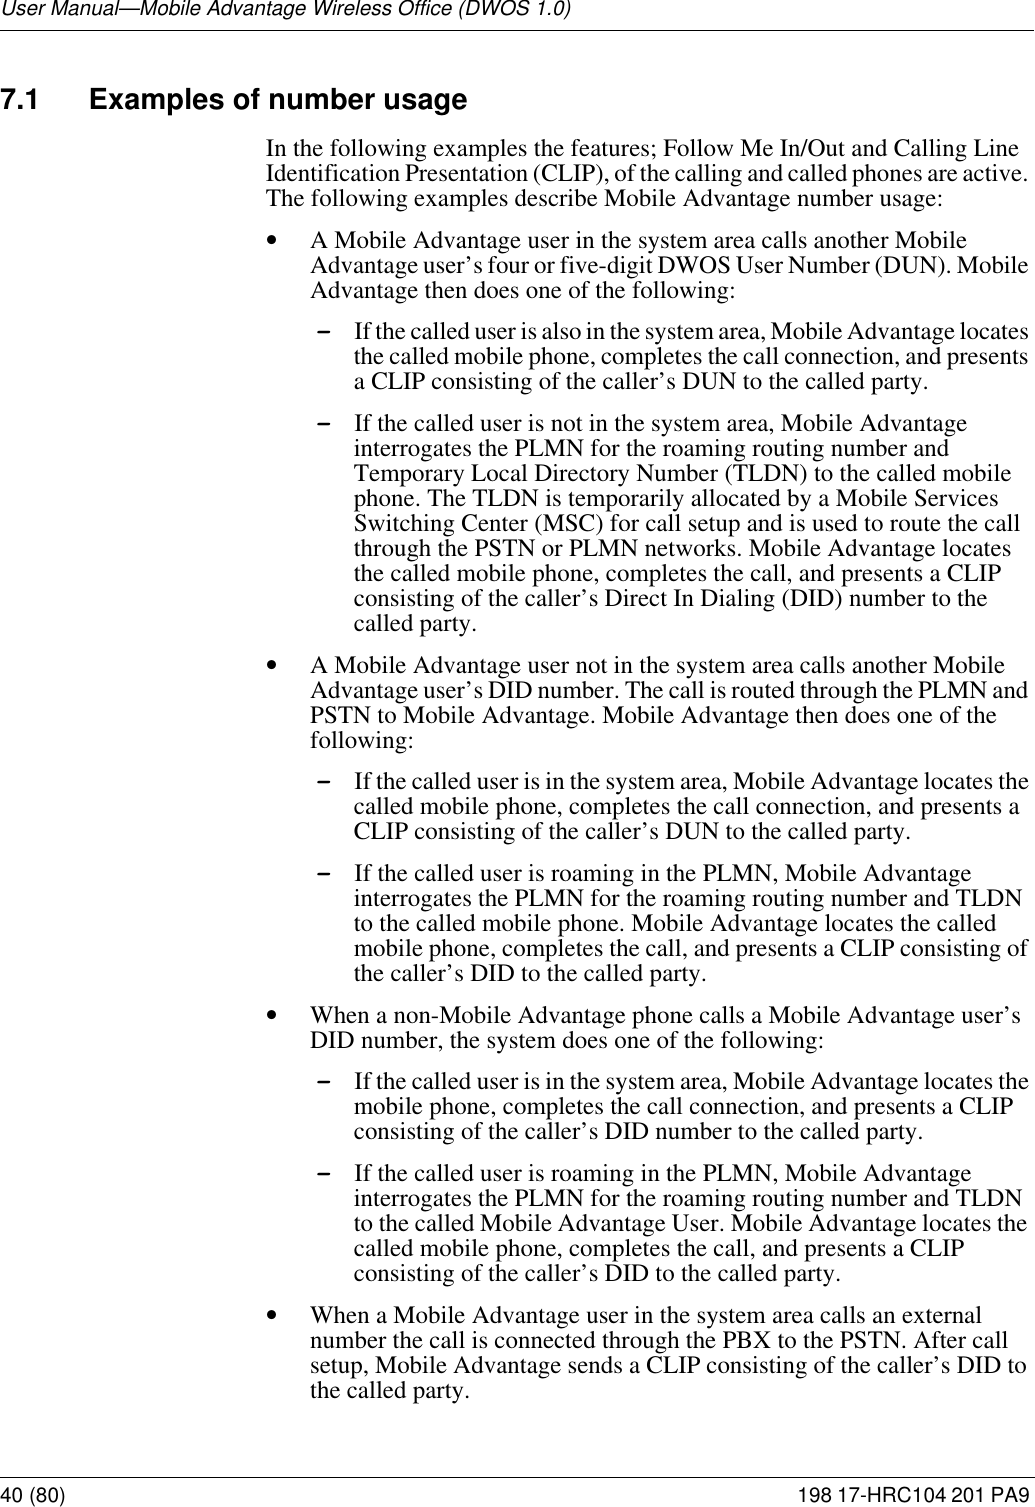 User Manual—Mobile Advantage Wireless Office (DWOS 1.0)40 (80) 198 17-HRC104 201 PA9 7.1 Examples of number usageIn the following examples the features; Follow Me In/Out and Calling Line Identification Presentation (CLIP), of the calling and called phones are active. The following examples describe Mobile Advantage number usage:•A Mobile Advantage user in the system area calls another Mobile Advantage user’s four or five-digit DWOS User Number (DUN). Mobile Advantage then does one of the following:-If the called user is also in the system area, Mobile Advantage locates the called mobile phone, completes the call connection, and presents a CLIP consisting of the caller’s DUN to the called party.-If the called user is not in the system area, Mobile Advantage interrogates the PLMN for the roaming routing number and Temporary Local Directory Number (TLDN) to the called mobile phone. The TLDN is temporarily allocated by a Mobile Services Switching Center (MSC) for call setup and is used to route the call through the PSTN or PLMN networks. Mobile Advantage locates the called mobile phone, completes the call, and presents a CLIP consisting of the caller’s Direct In Dialing (DID) number to the called party. •A Mobile Advantage user not in the system area calls another Mobile Advantage user’s DID number. The call is routed through the PLMN and PSTN to Mobile Advantage. Mobile Advantage then does one of the following:-If the called user is in the system area, Mobile Advantage locates the called mobile phone, completes the call connection, and presents a CLIP consisting of the caller’s DUN to the called party.-If the called user is roaming in the PLMN, Mobile Advantage interrogates the PLMN for the roaming routing number and TLDN to the called mobile phone. Mobile Advantage locates the called mobile phone, completes the call, and presents a CLIP consisting of the caller’s DID to the called party. •When a non-Mobile Advantage phone calls a Mobile Advantage user’s DID number, the system does one of the following:-If the called user is in the system area, Mobile Advantage locates the mobile phone, completes the call connection, and presents a CLIP consisting of the caller’s DID number to the called party. -If the called user is roaming in the PLMN, Mobile Advantage interrogates the PLMN for the roaming routing number and TLDN to the called Mobile Advantage User. Mobile Advantage locates the called mobile phone, completes the call, and presents a CLIP consisting of the caller’s DID to the called party. •When a Mobile Advantage user in the system area calls an external number the call is connected through the PBX to the PSTN. After call setup, Mobile Advantage sends a CLIP consisting of the caller’s DID to the called party.